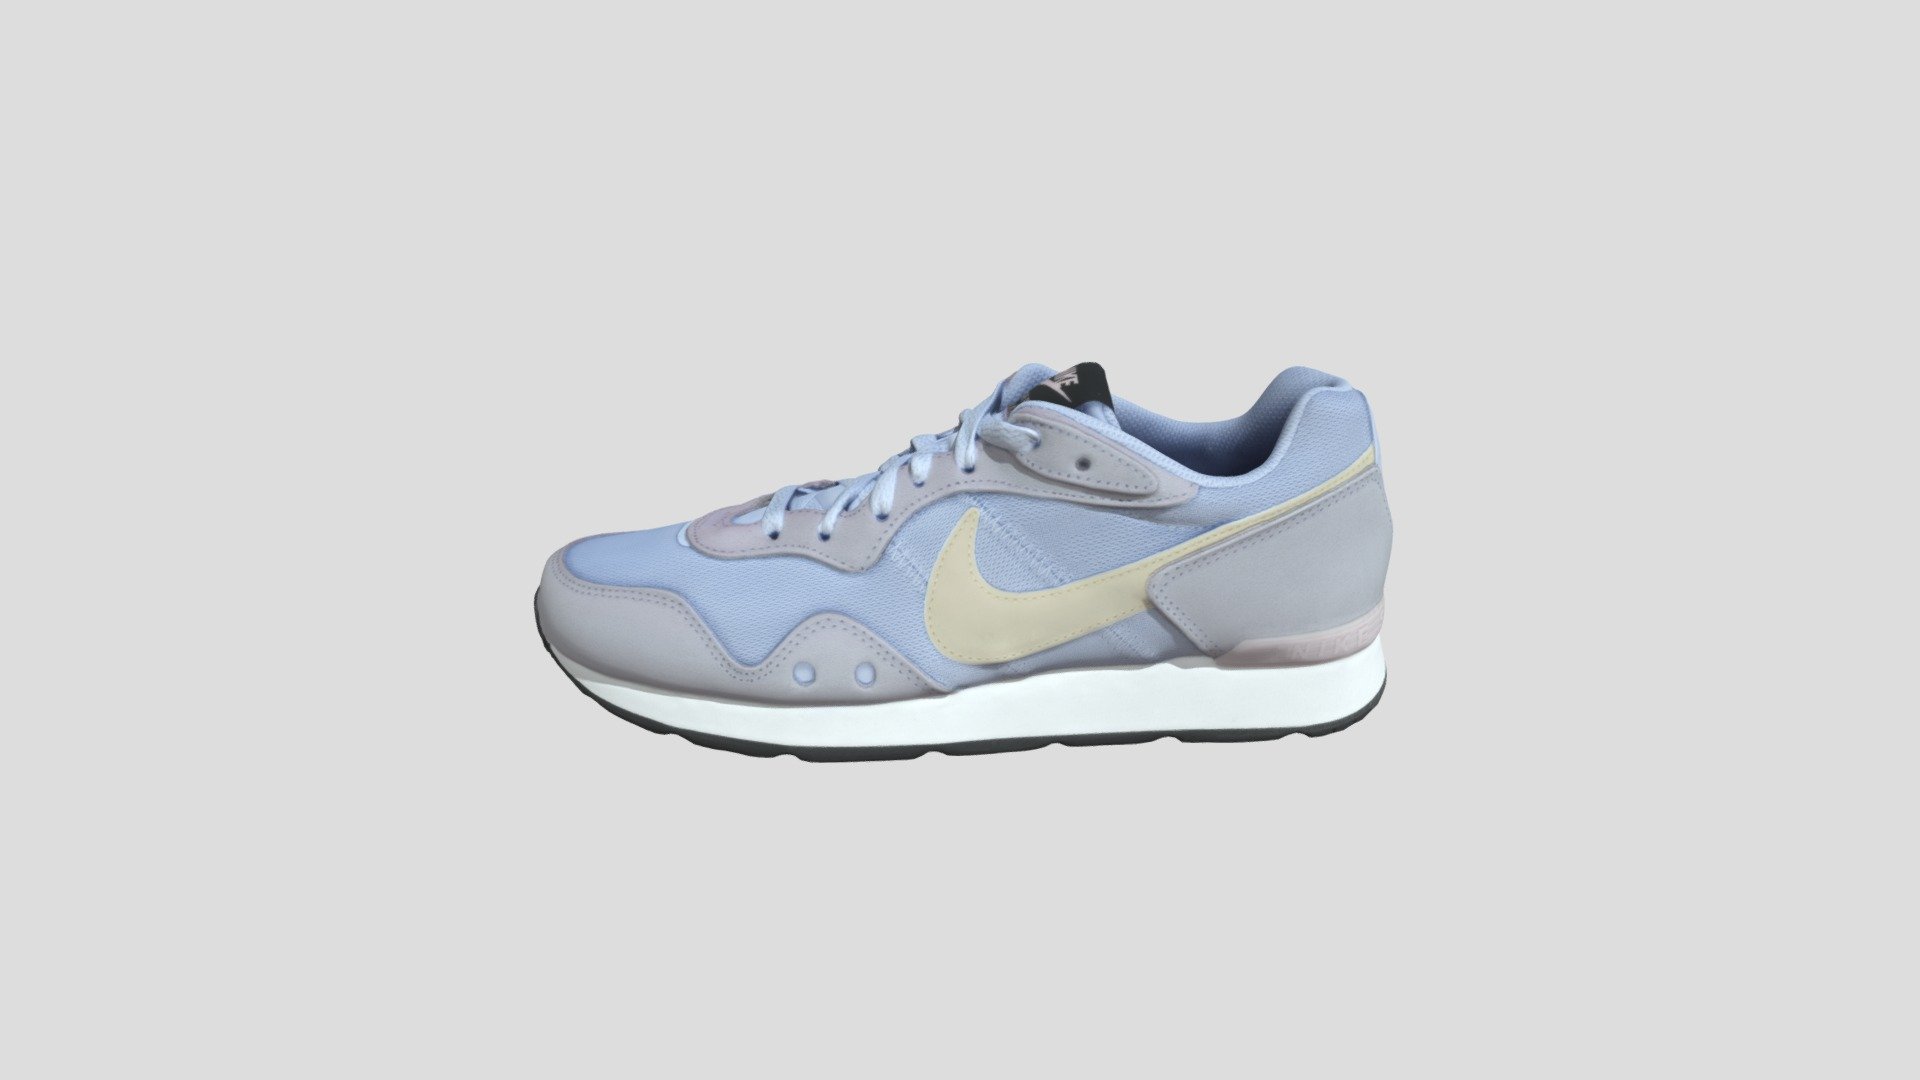 This model was created firstly by 3D scanning on retail version, and then being detail-improved manually, thus a 1:1 repulica of the original
PBR ready
Low-poly
4K texture
Welcome to check out other models we have to offer. And we do accept custom orders as well :) - Nike Venture Runner 灰蓝黄 女款_CK2948-003 - Buy Royalty Free 3D model by TRARGUS 3d model